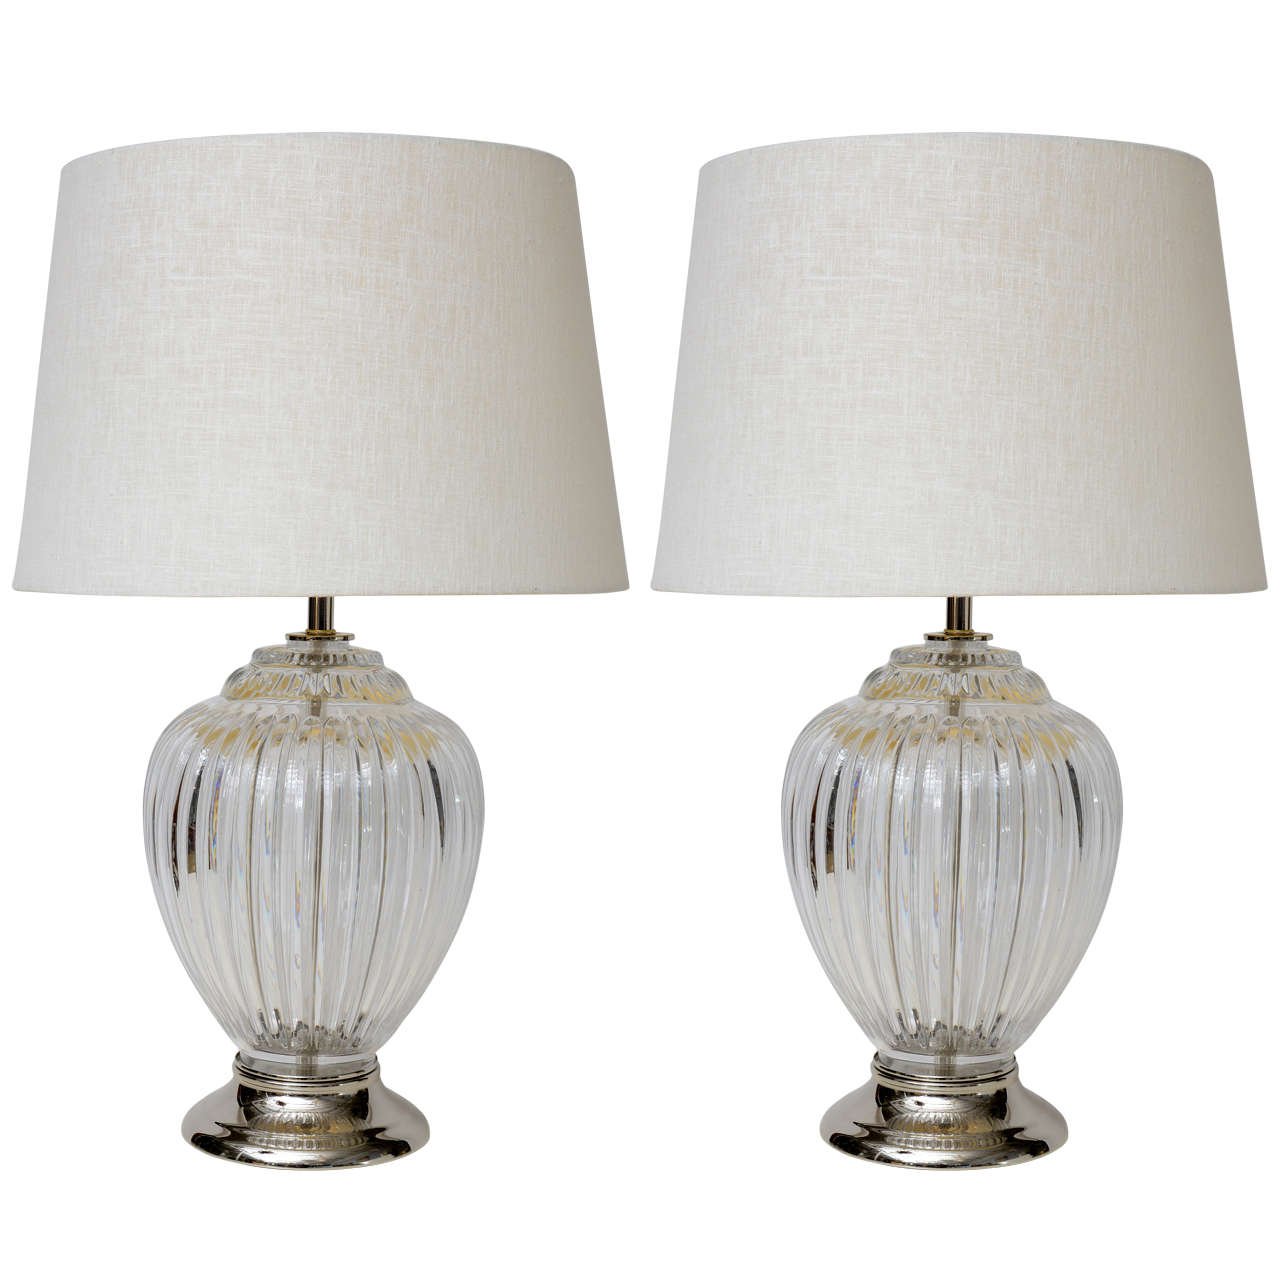 Baccarat Style Crystal Table Lamps, Baccarat Crystal Table Lamps